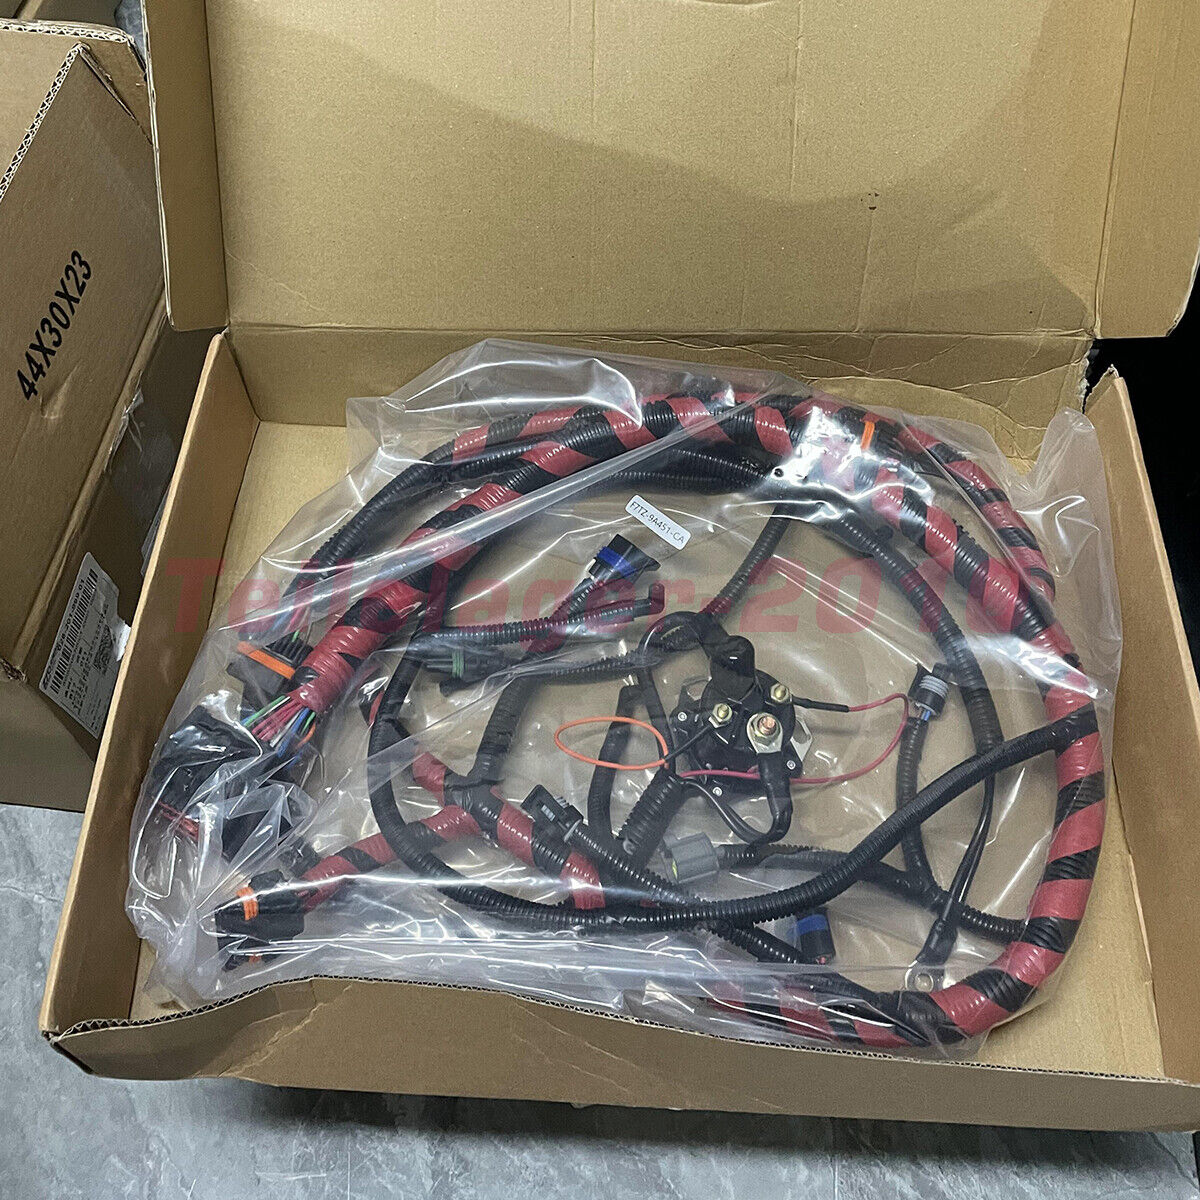 NEW Upgraded Engine Wiring Harness for 1997 Ford F-250 F-350 7.3L Diesel